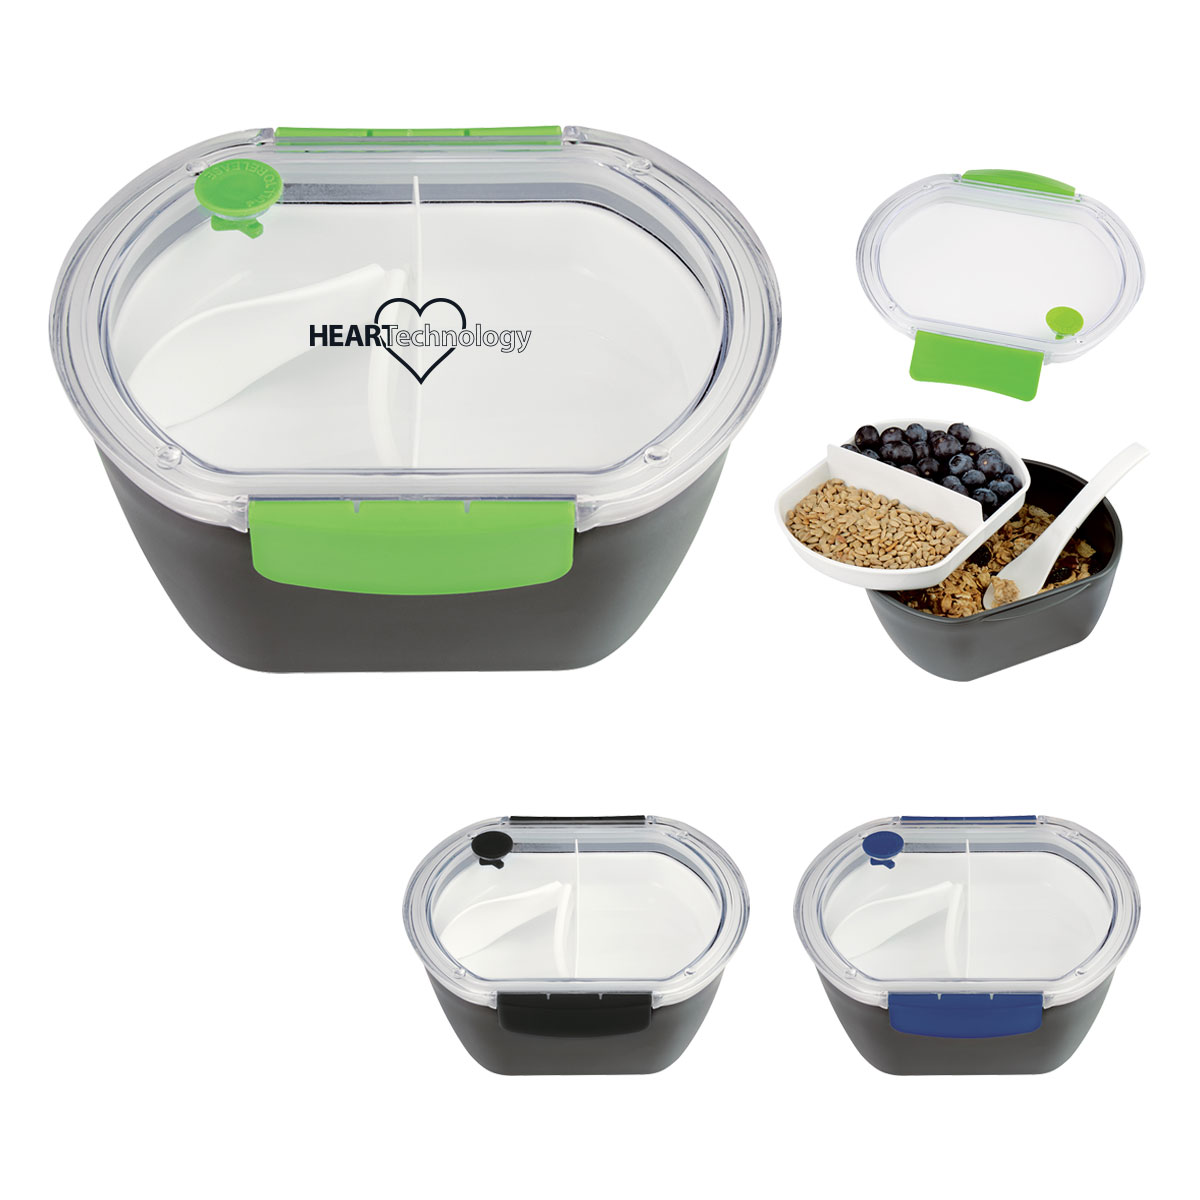 Reusable Oval 2 Compartment Lunch Set with Utensils